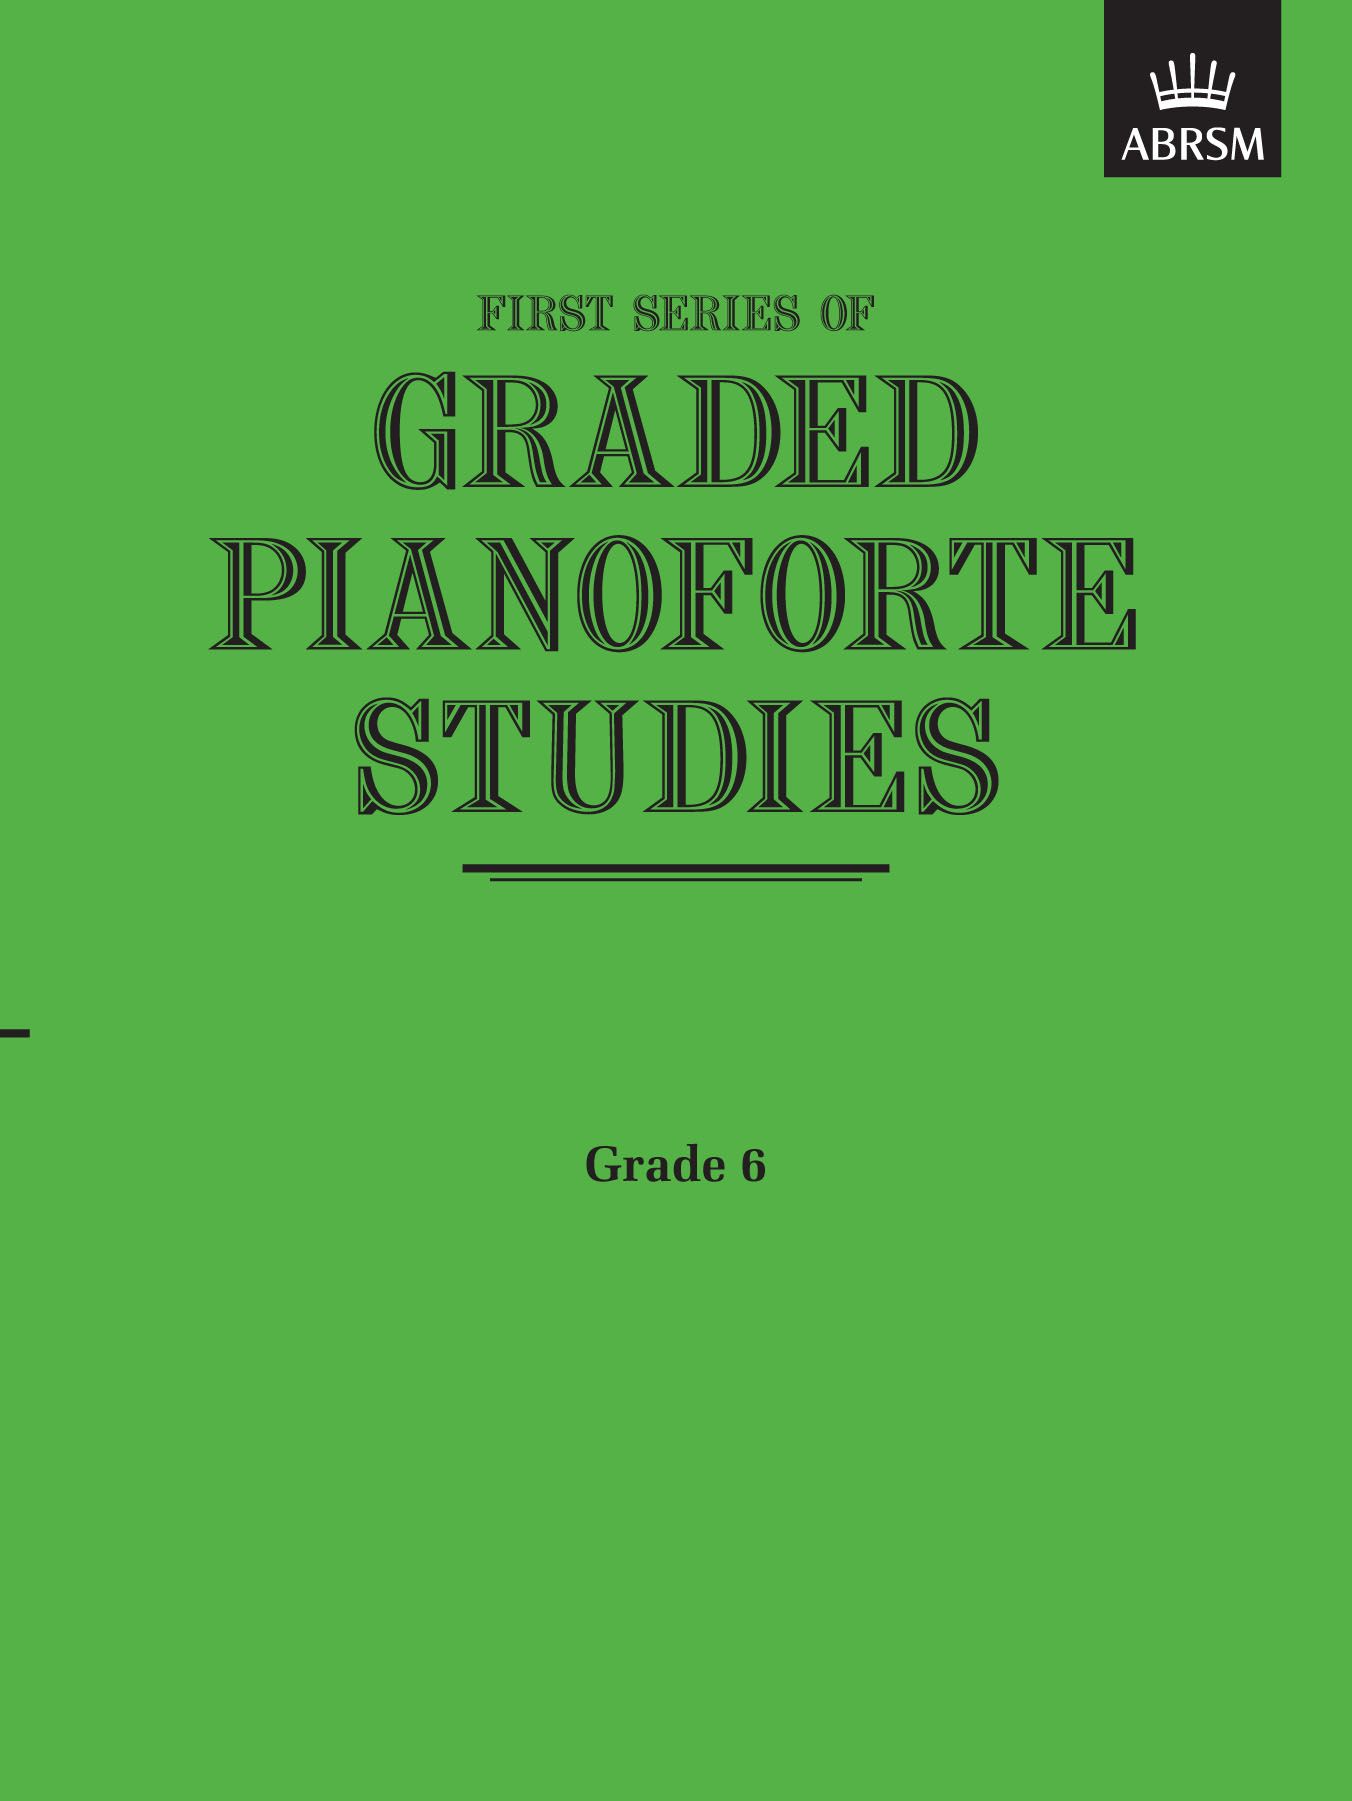 First Series of Graded Pianoforte Studies G6